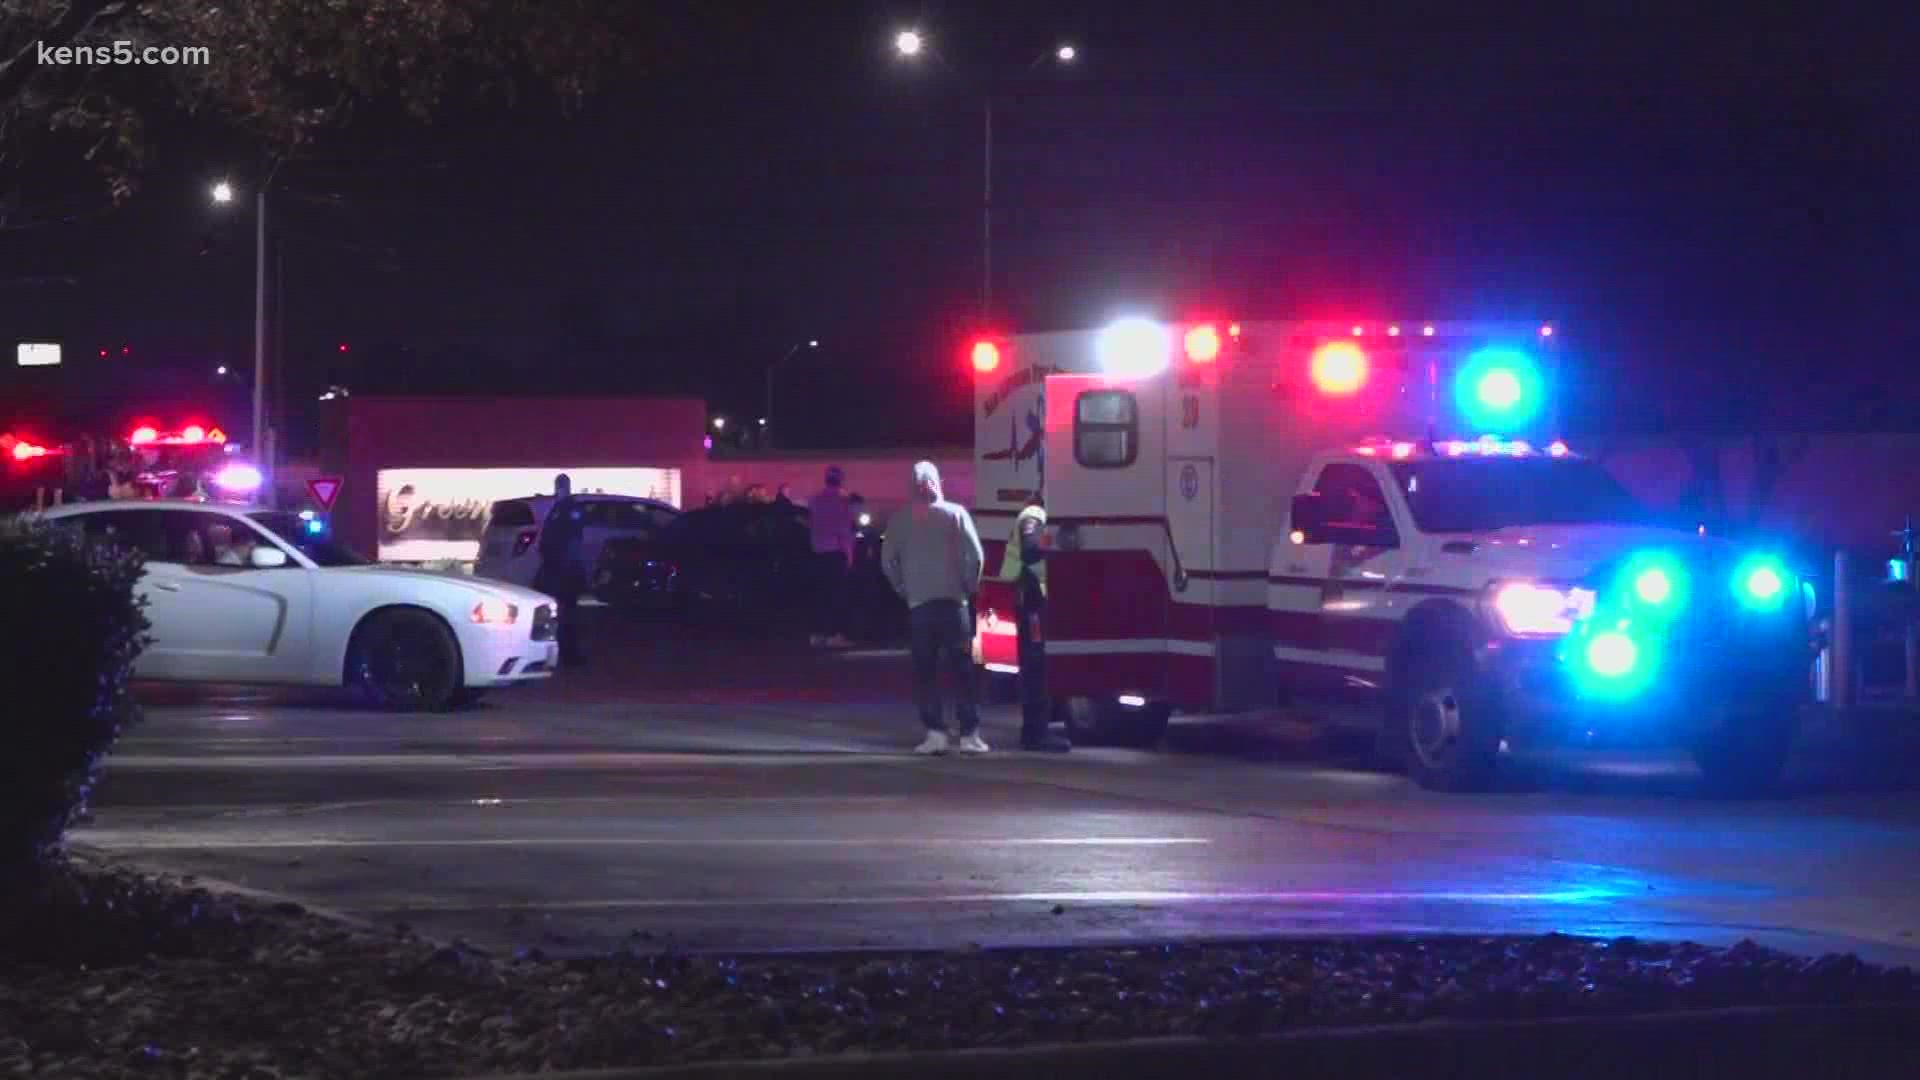 Police say a woman was injured in a crash at Loop 410 and Perrin Beitel Road early Sunday morning.